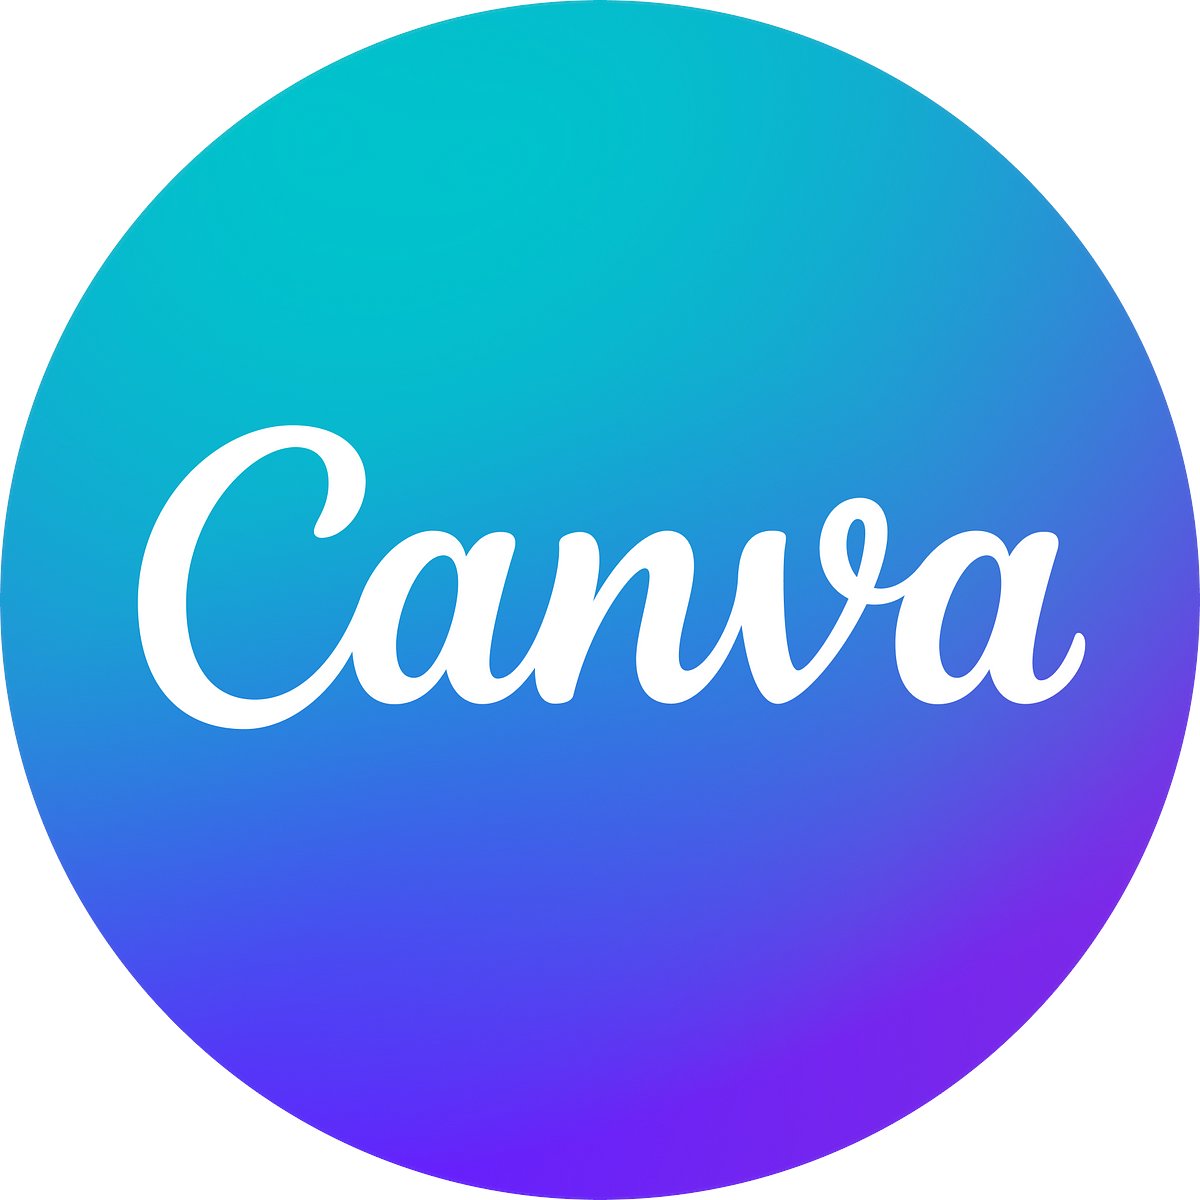 📢Plano ISD folks - We've gone #Canva! Today you'll see a @canva tile in Webdesk. More info at pisd.edu/canva. Enjoy creating visually-engaging graphics, activities, presentations, & more! Did you know there are built-in AI tools?! #pisdtech #pisdlearns